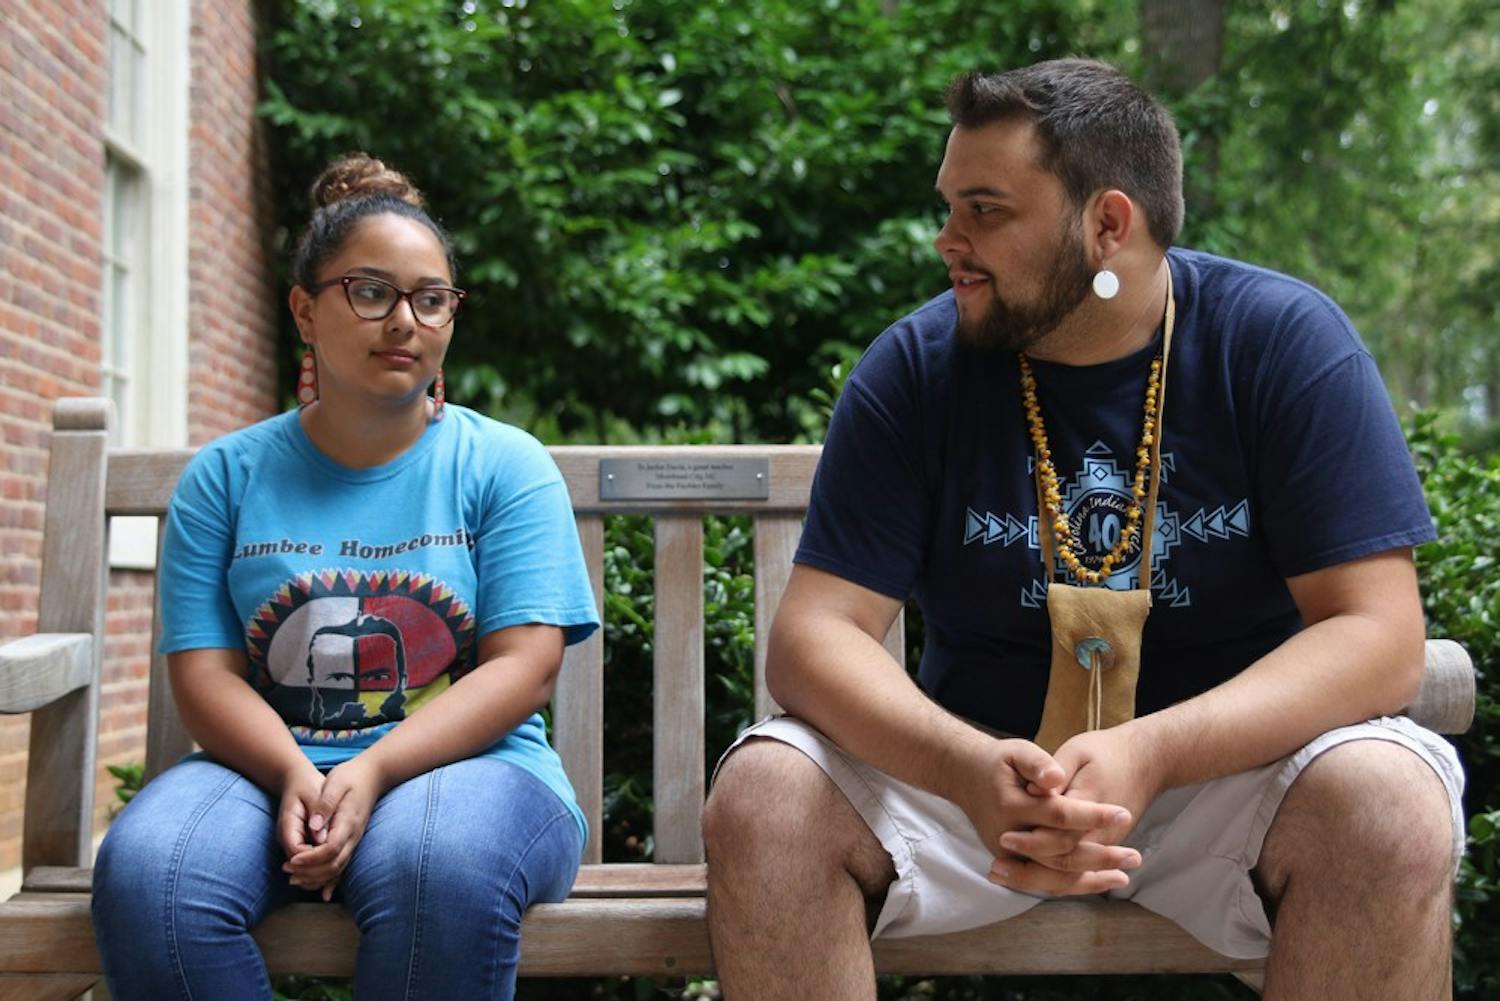 Sophomore&nbsp;Elena Polanco and First-Year Ryan Stanley sit and discuss the Lumbee tribe and their Lumbee&nbsp;heritage.